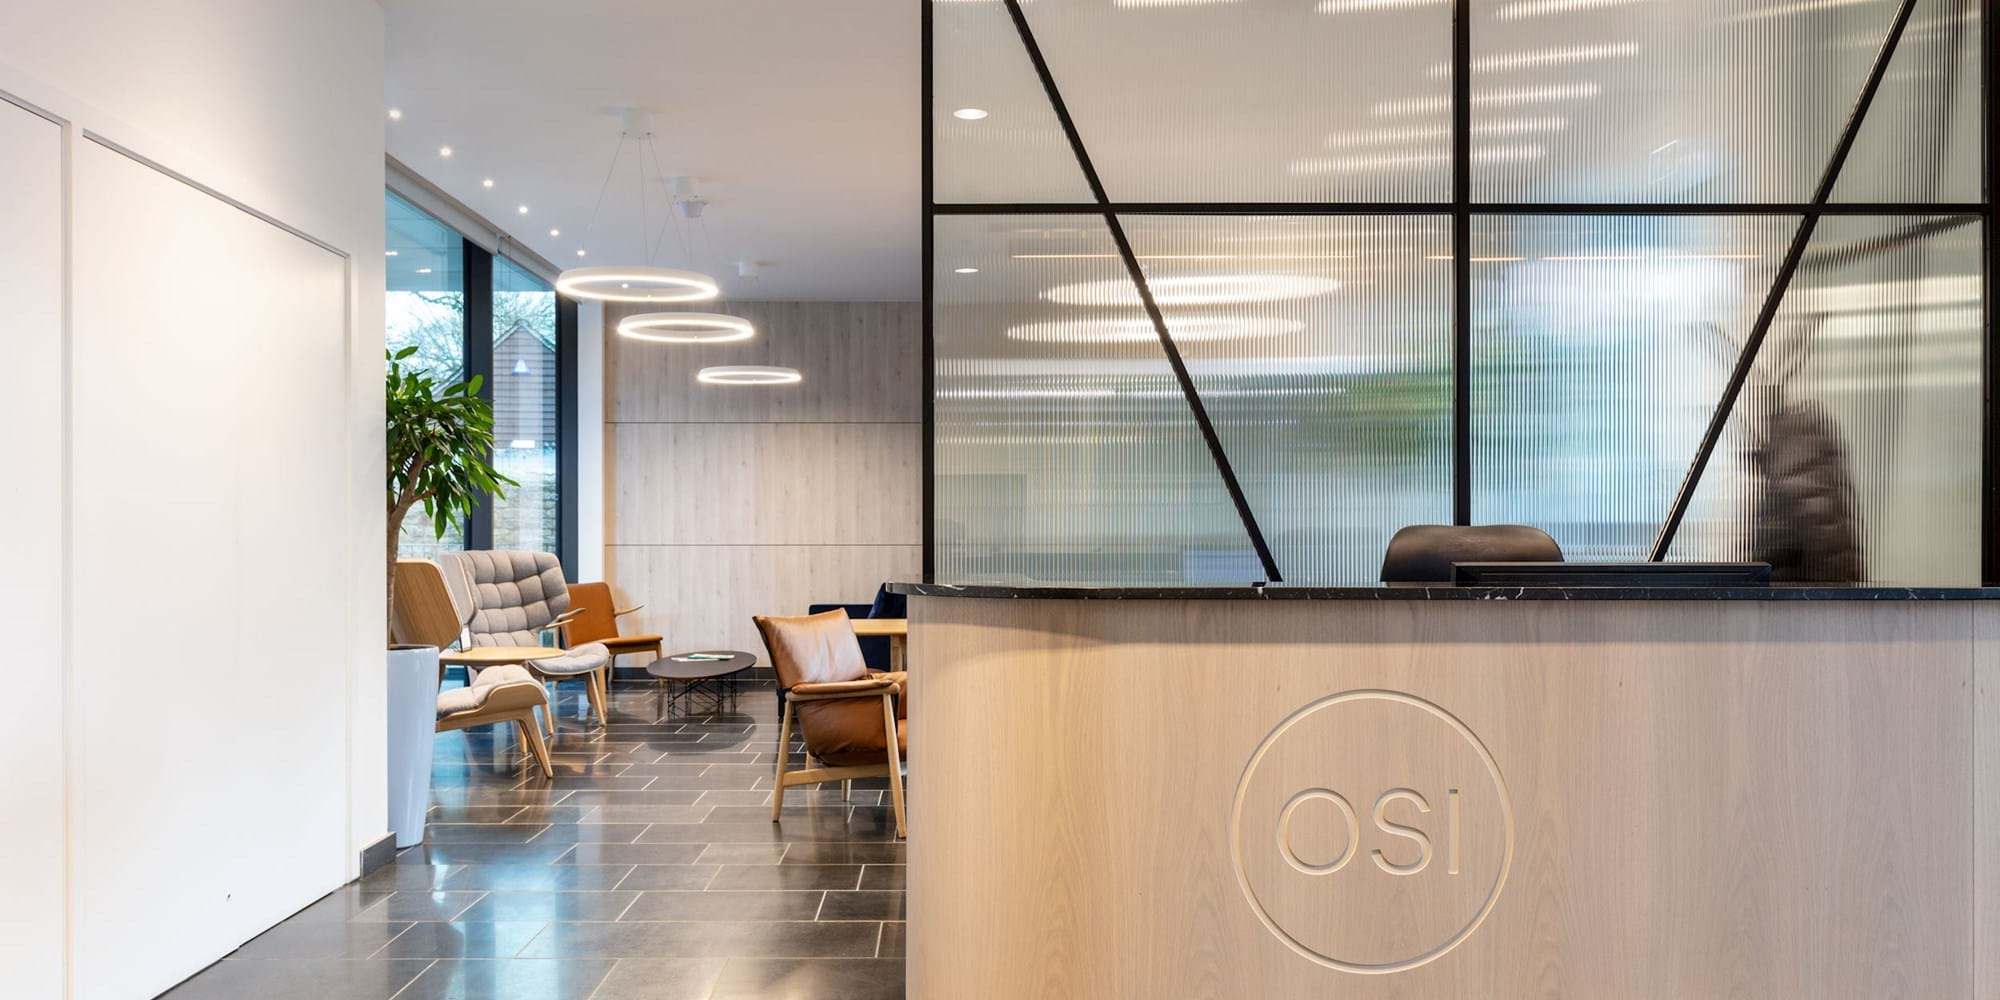 Modus Workspace office design, fit out and refurbishment - OSI - Modus_OSI_2-69.jpg